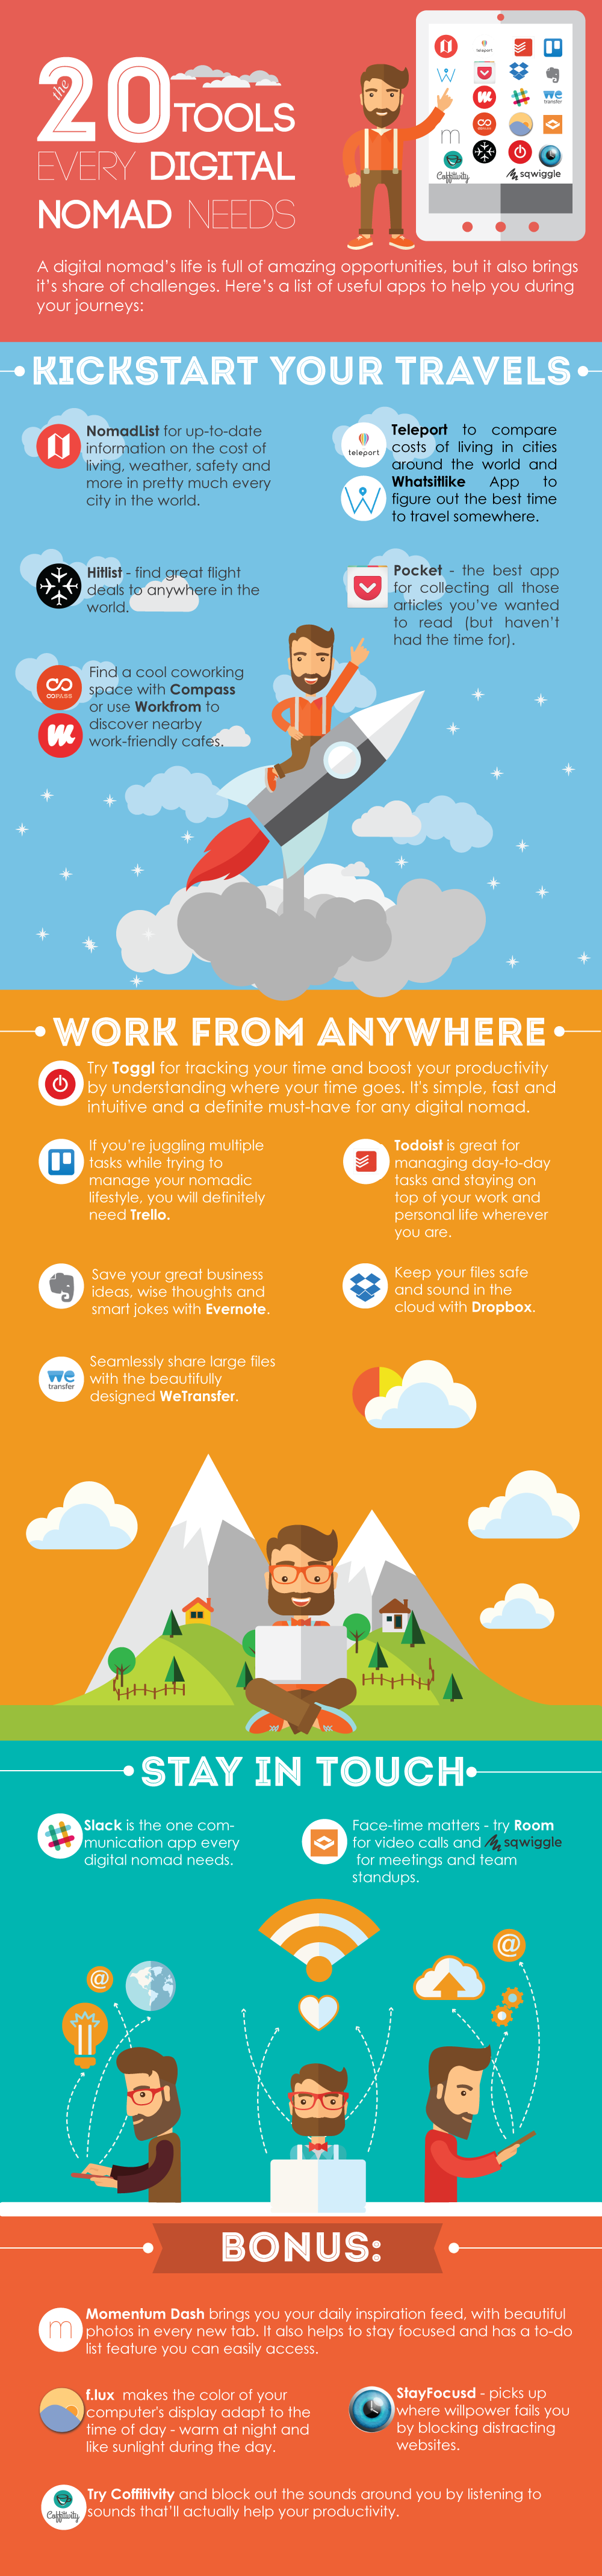 20 Best Tools For Digital Nomads - #infographic